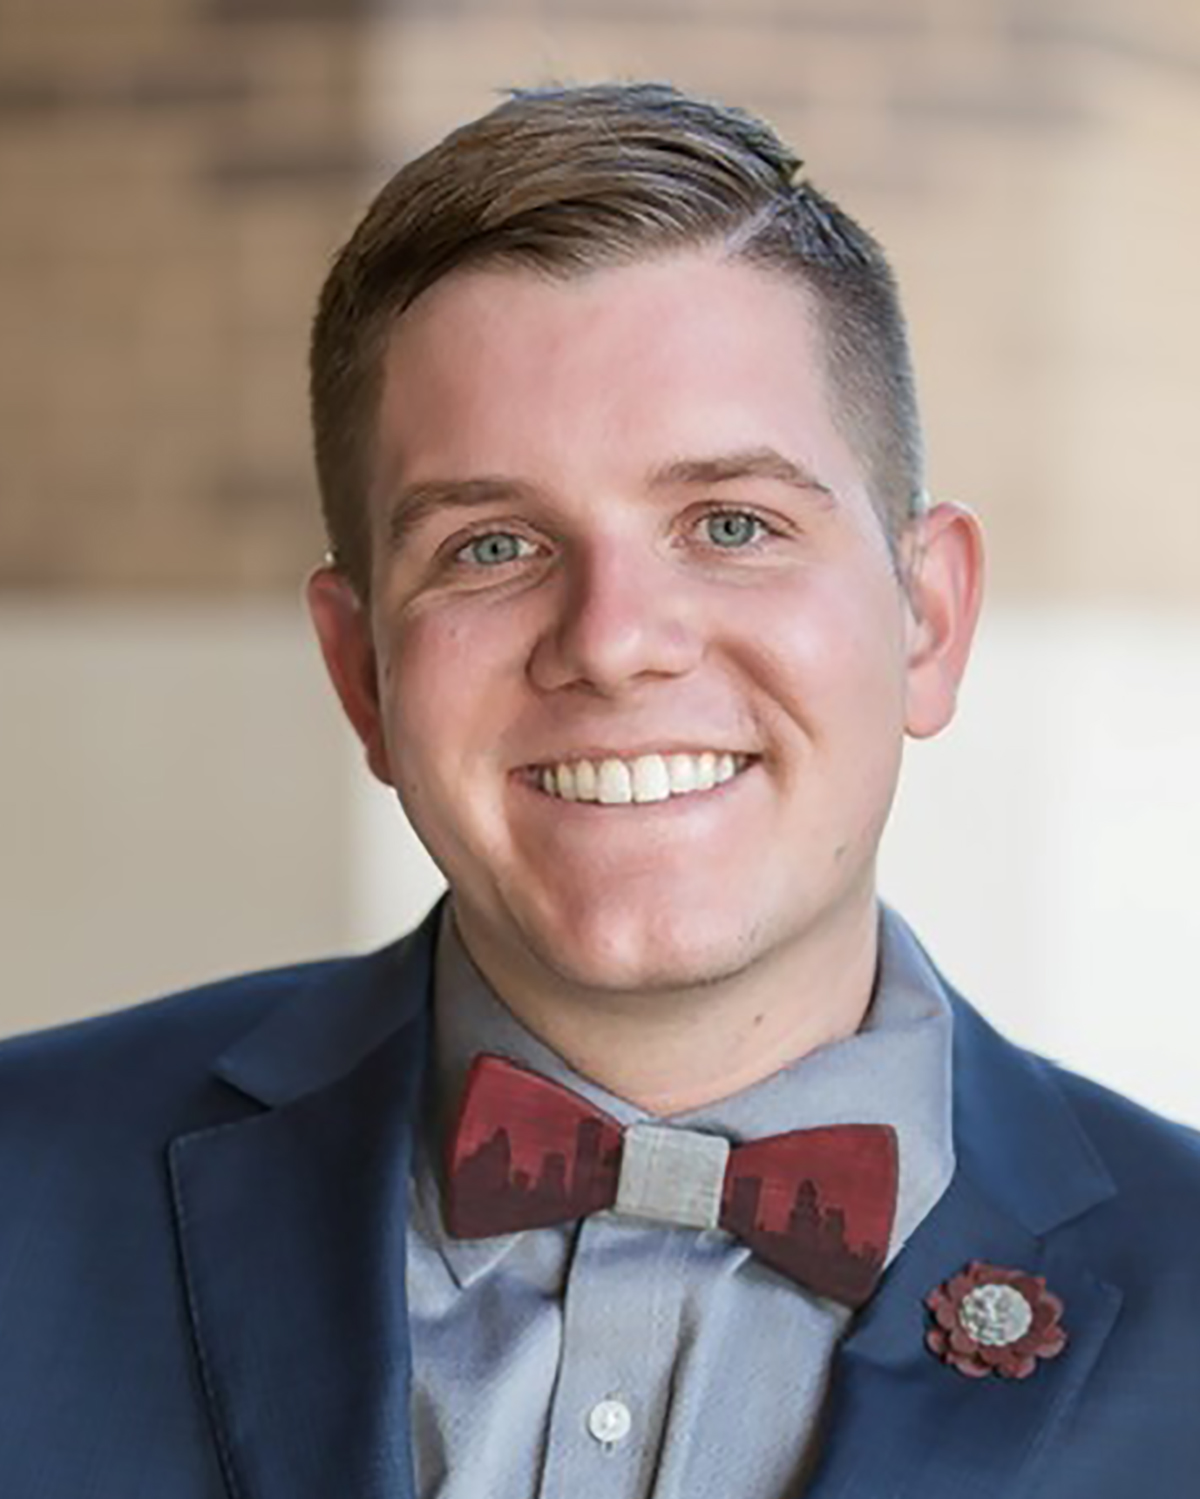 Smiling young man wearing bow tie